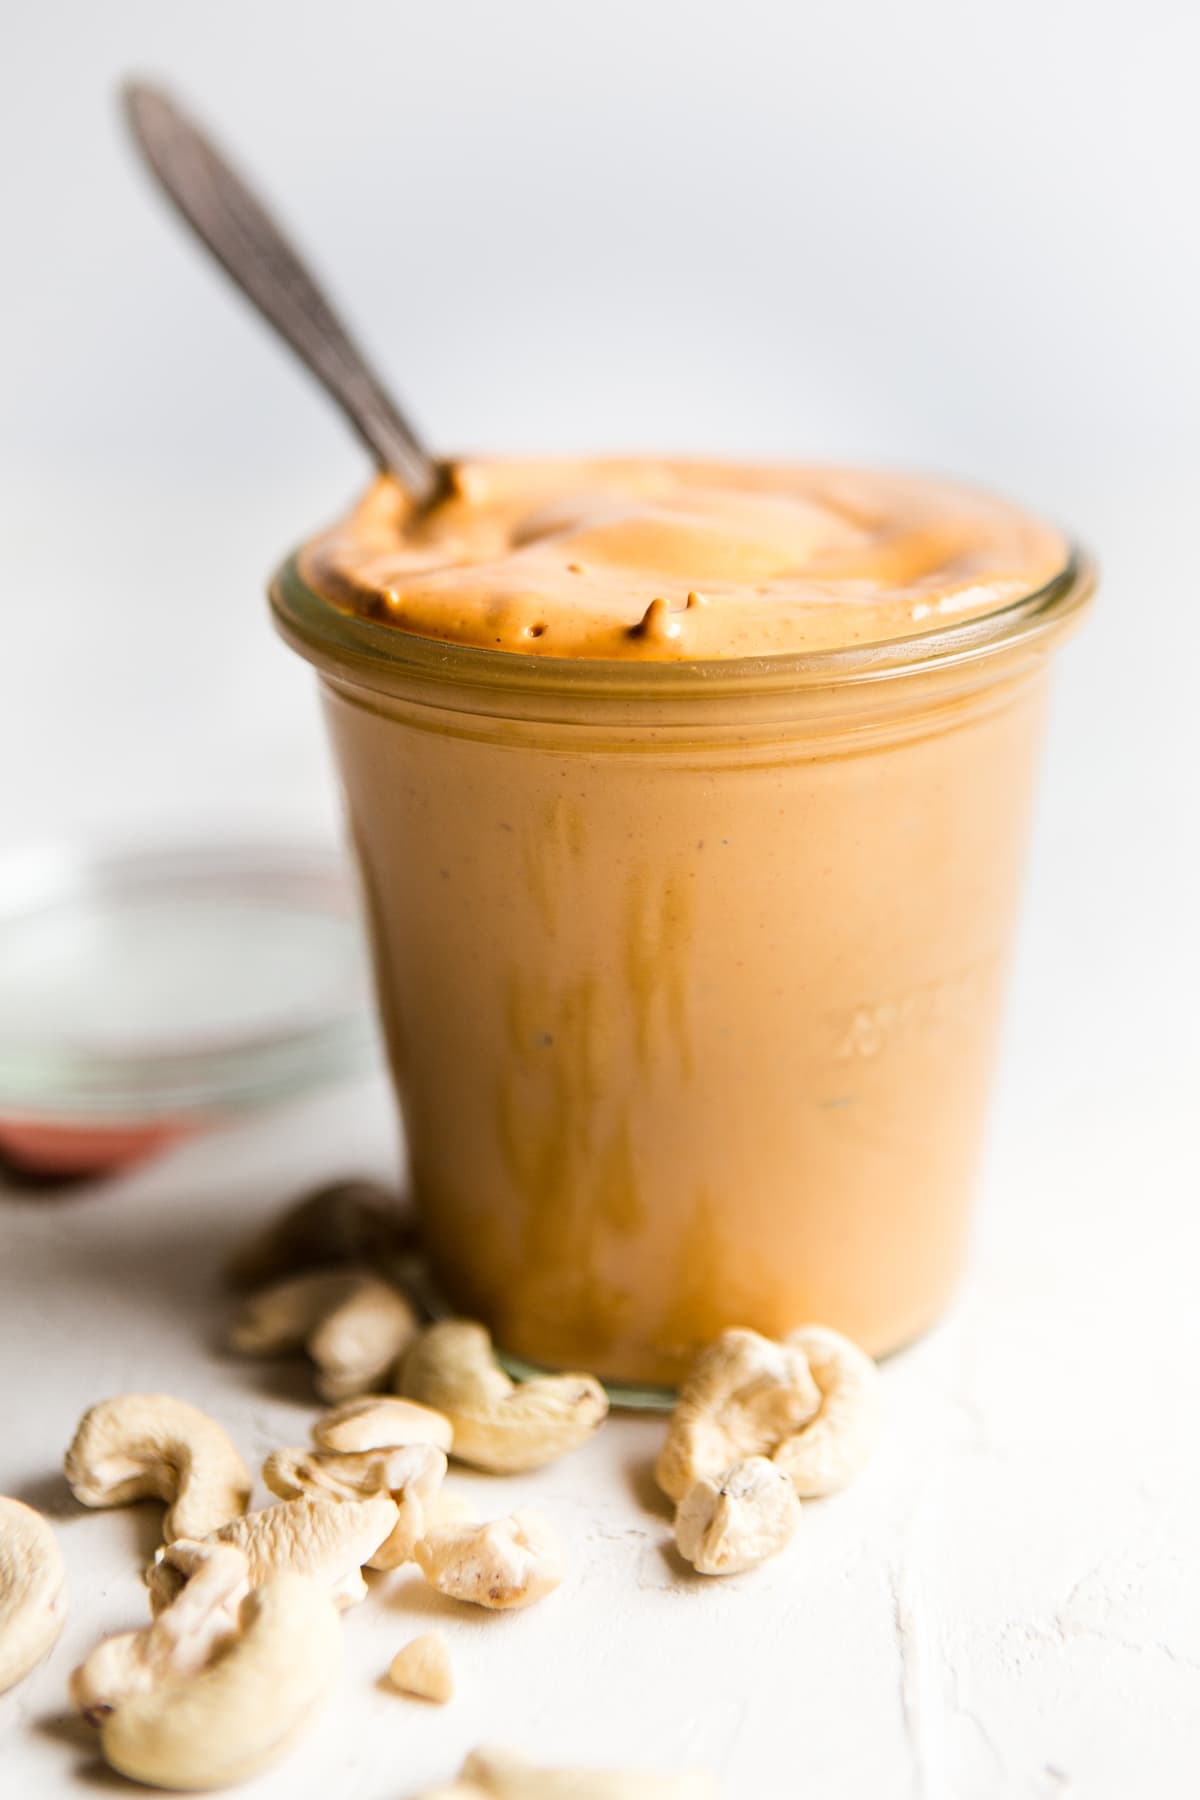 Vegan cashew cheese in a jar with a spoon and some raw cashews